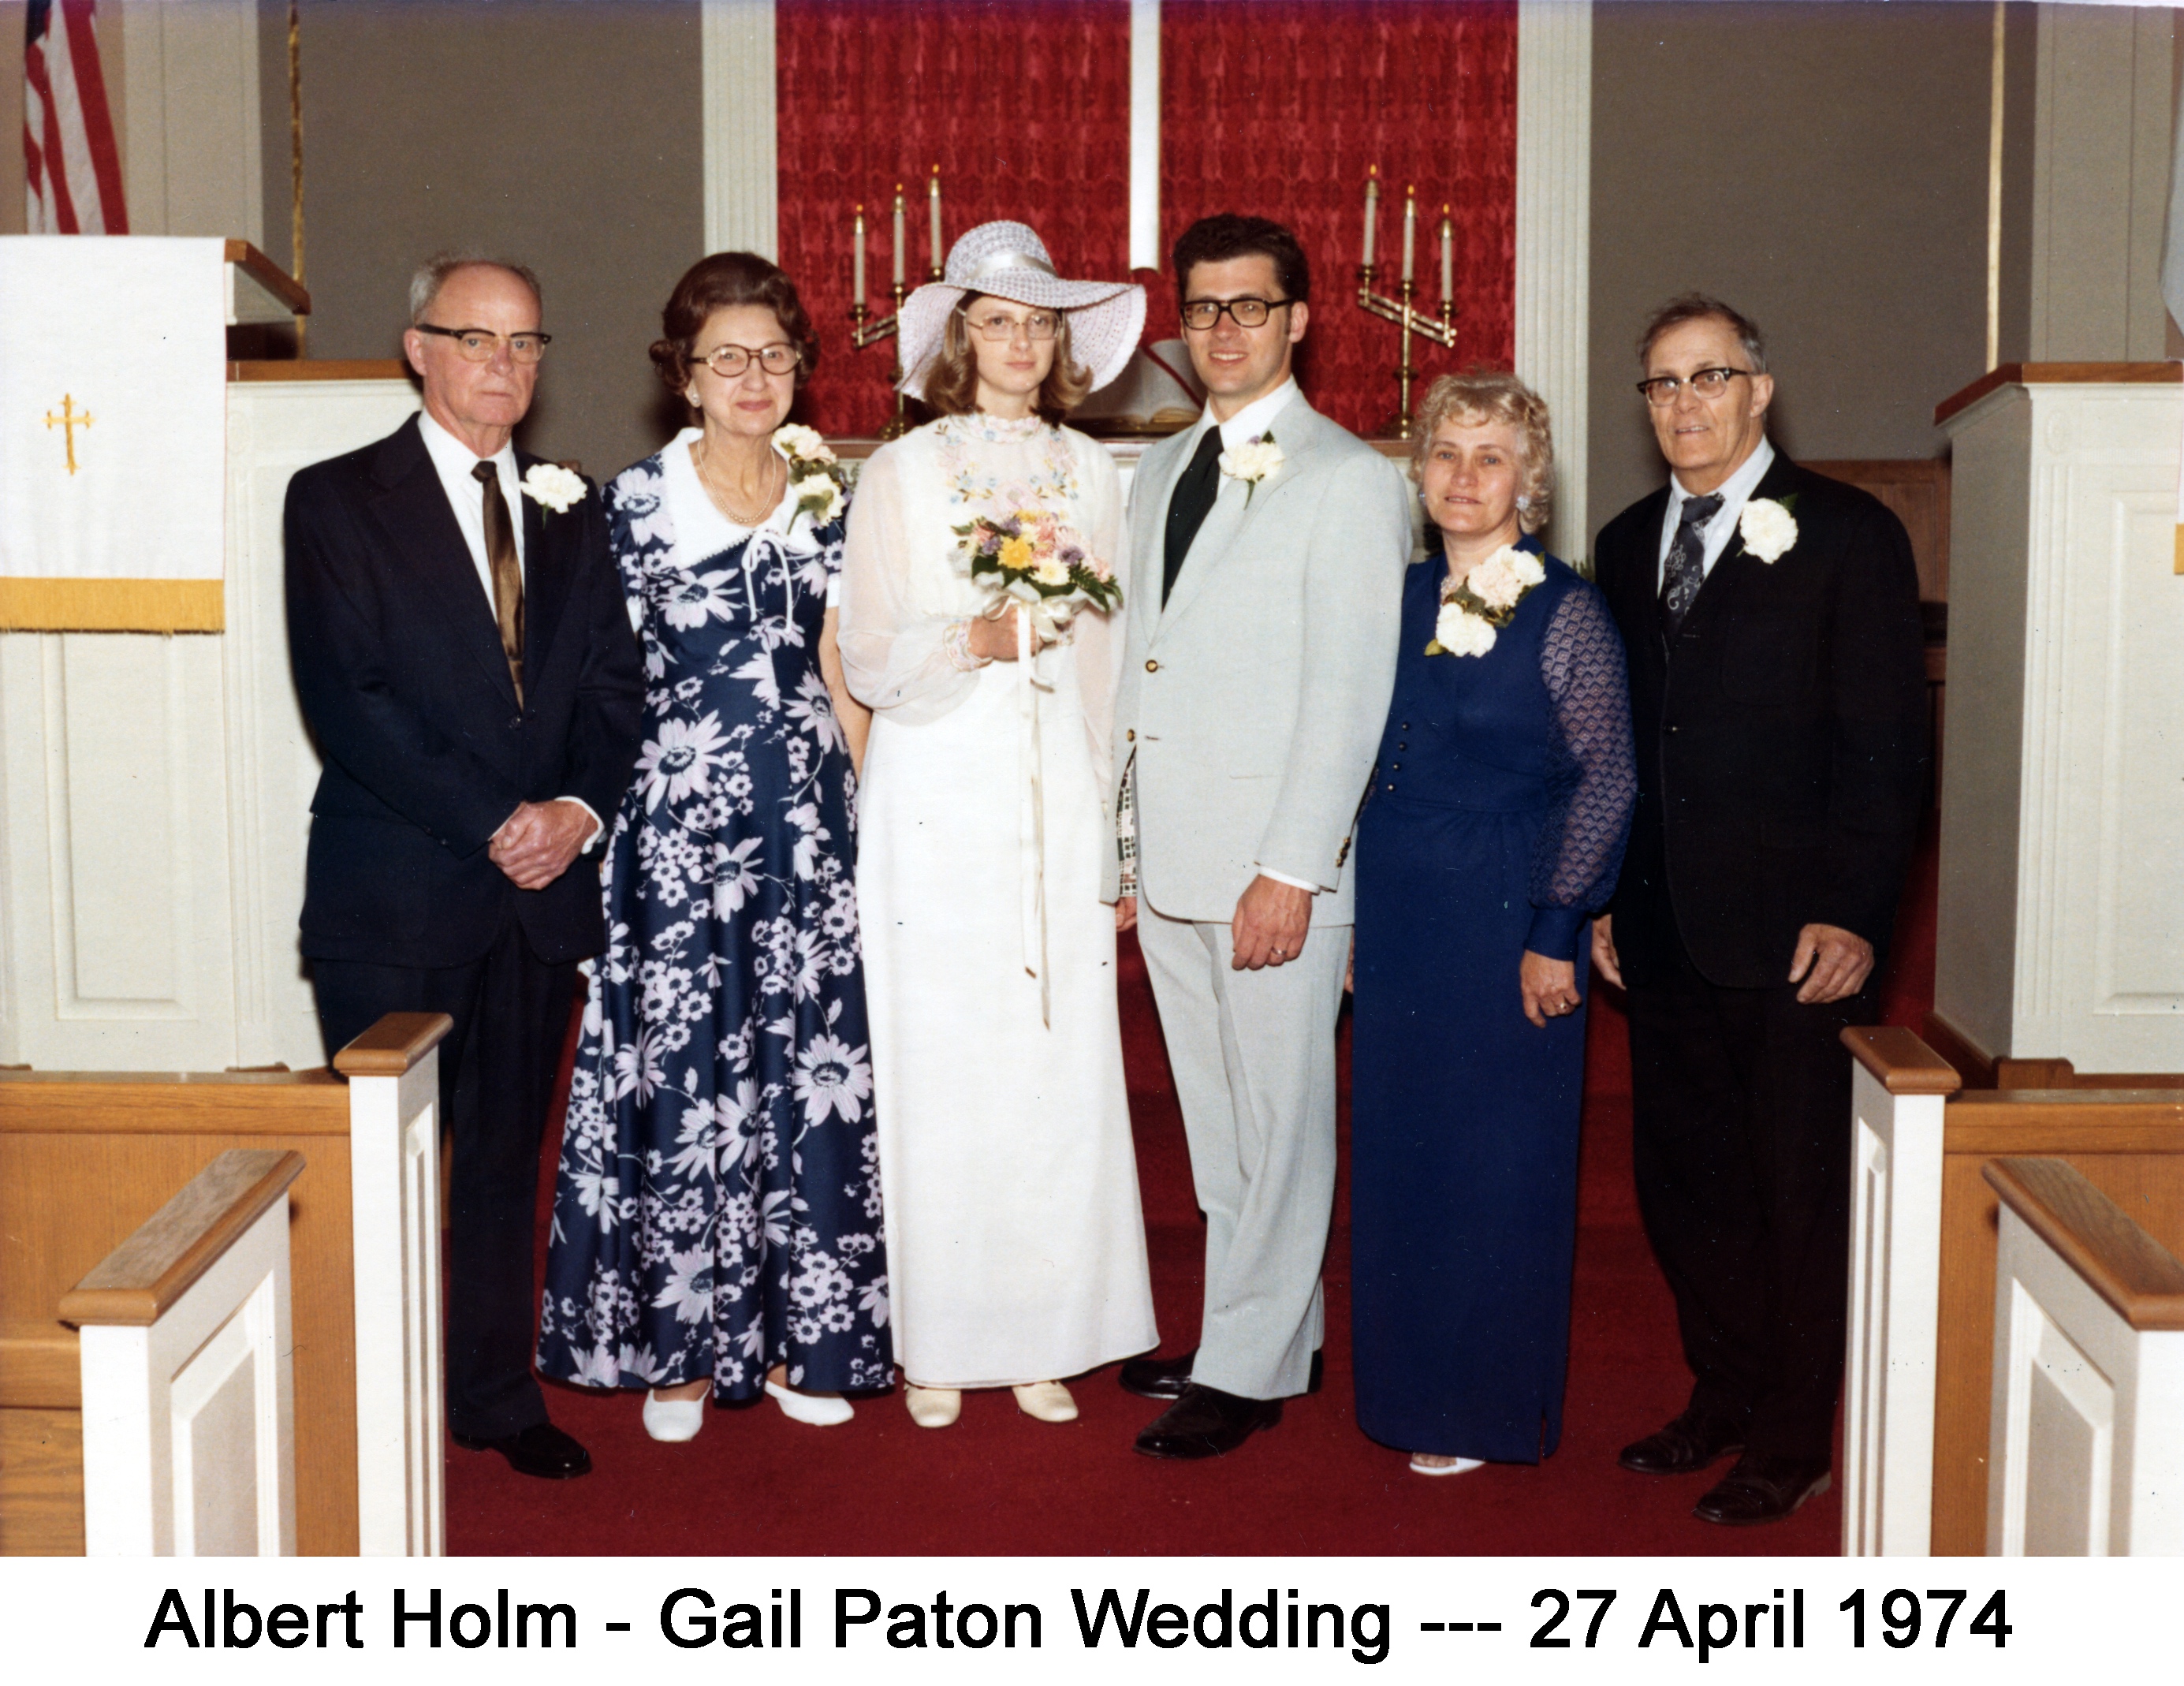 Wedding photo of Gail Paton and Albert Holm standing at the altar, flanked by their parents